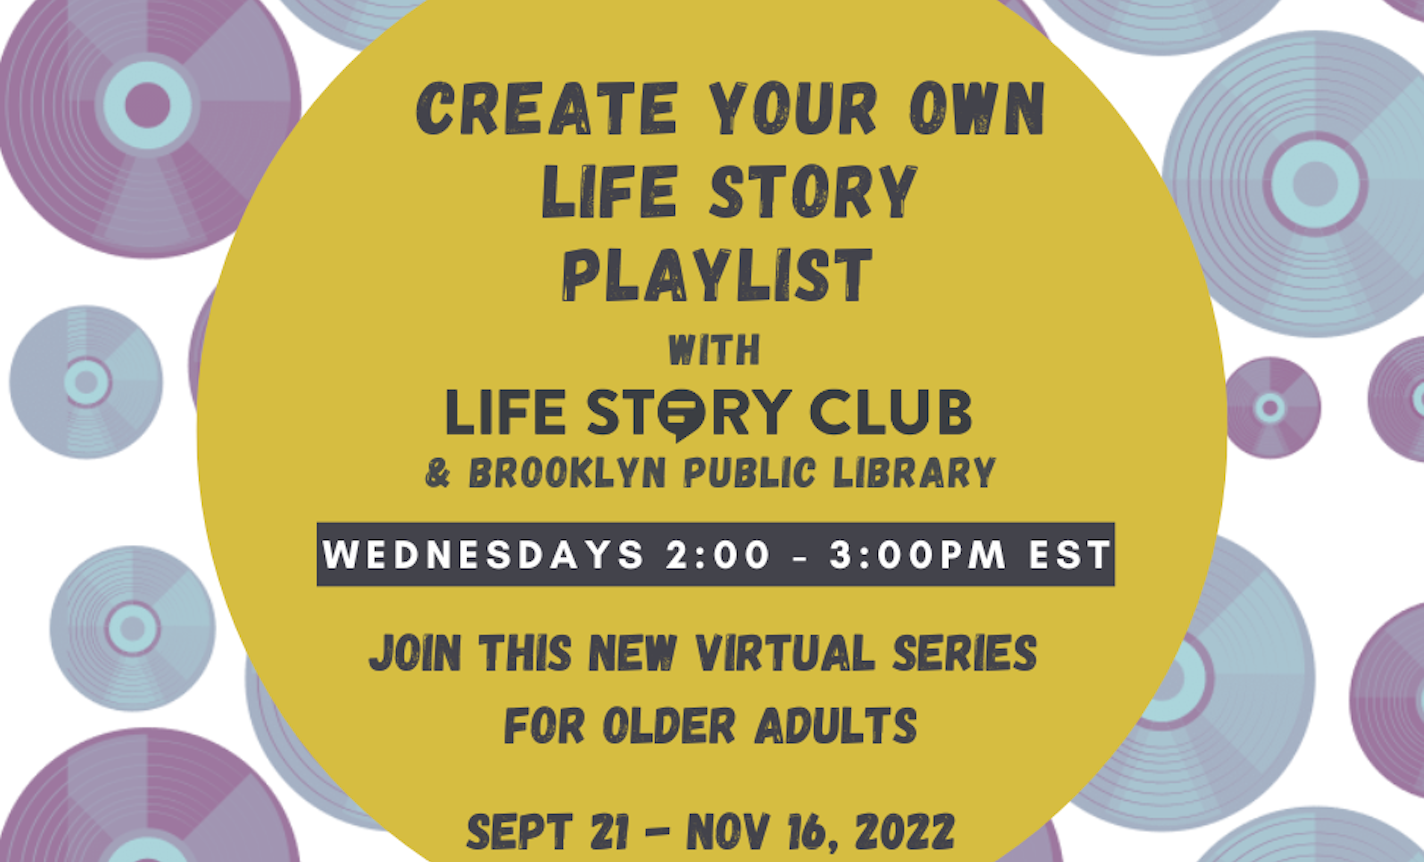 Create Your Own Life Story Playlist with Life Story Club